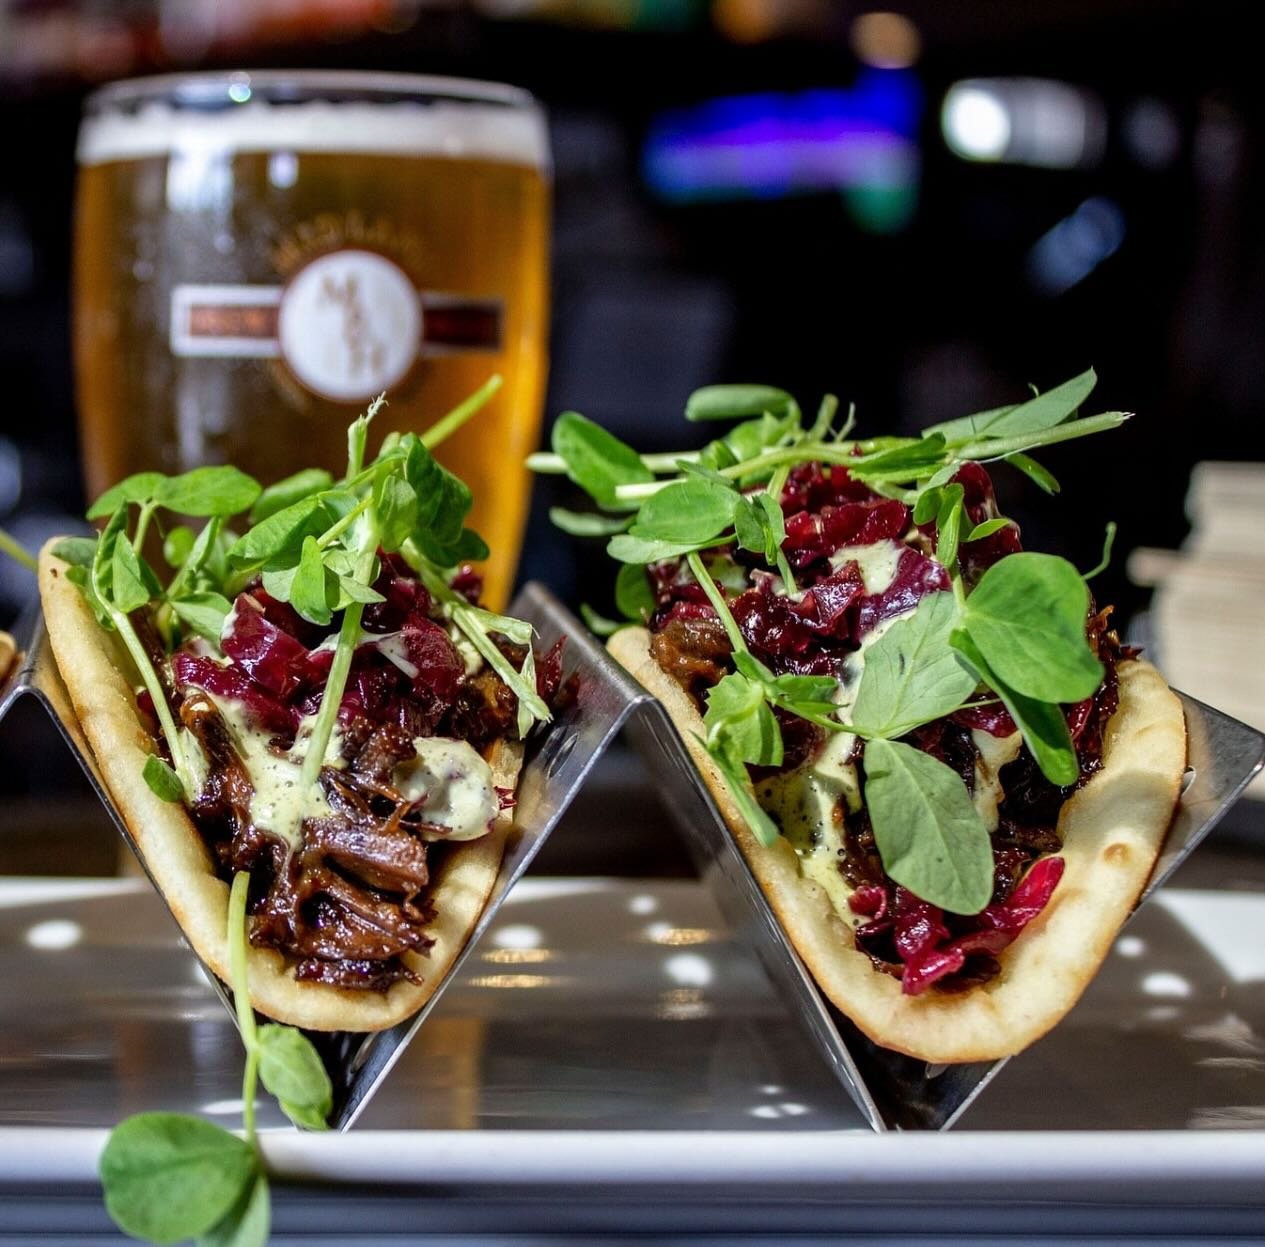 Tuesday, Tacos &amp; Trivia&hellip;🌮

Join Us At #MBH Hosted By Your Favorite @joetrivia From 8pm - till 1AM!

Happy Hour 🍻 

🌮$3 Tacos (Min of 3)
🍹$6 Margaritas
🥃$5 Tequila Shots
🍺$5 Corona &amp; Corona Lights

#MidlandBrewHouse #Tuesdays #Tac